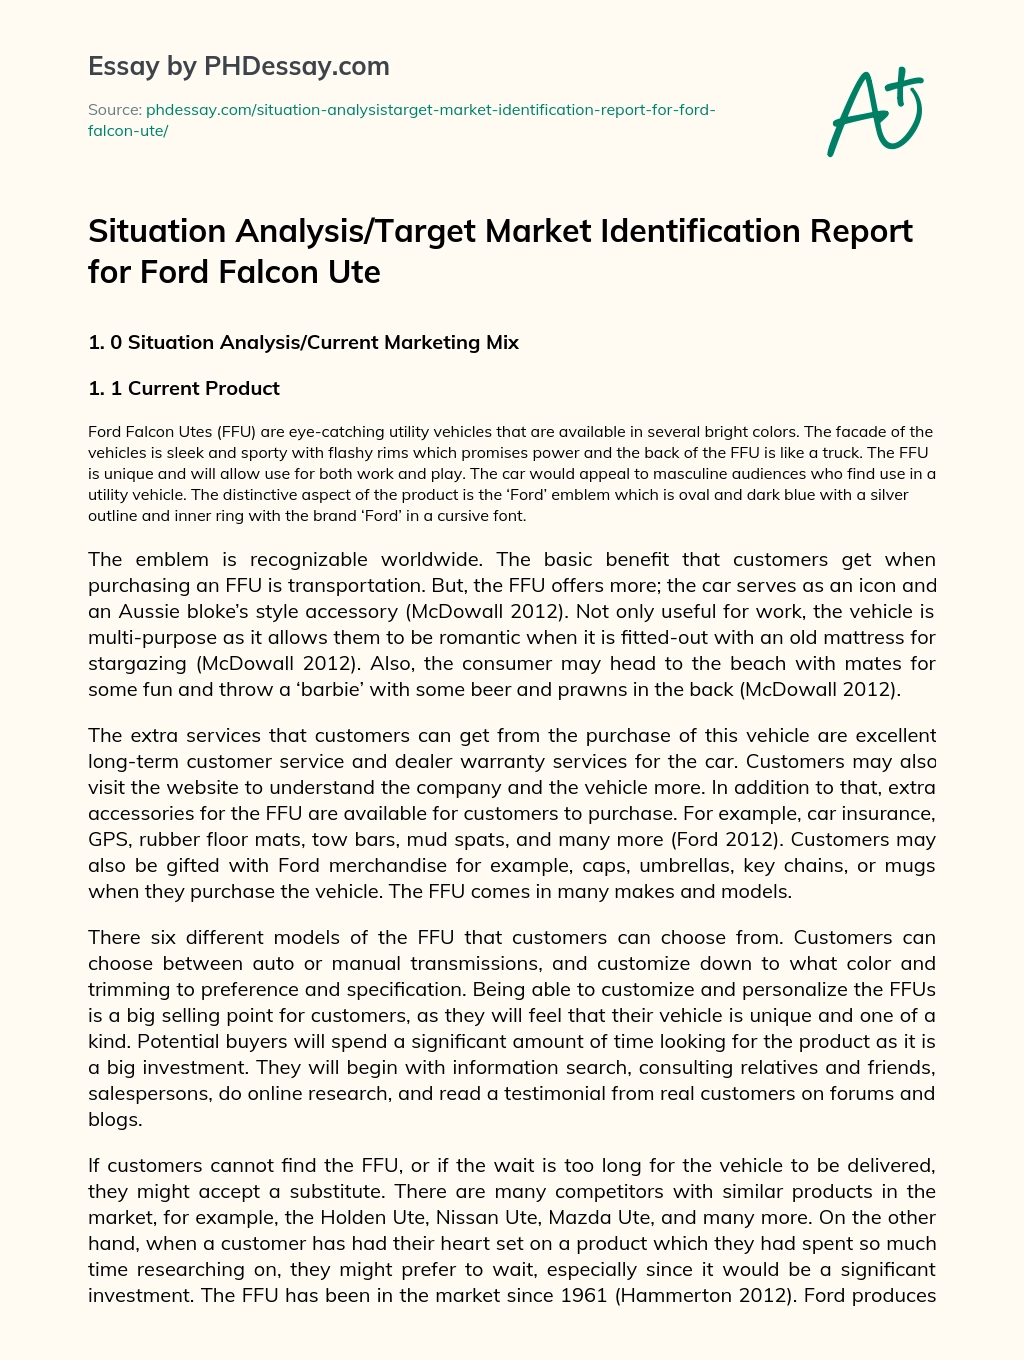 Situation Analysis/Target Market Identification Report for Ford Falcon Ute essay